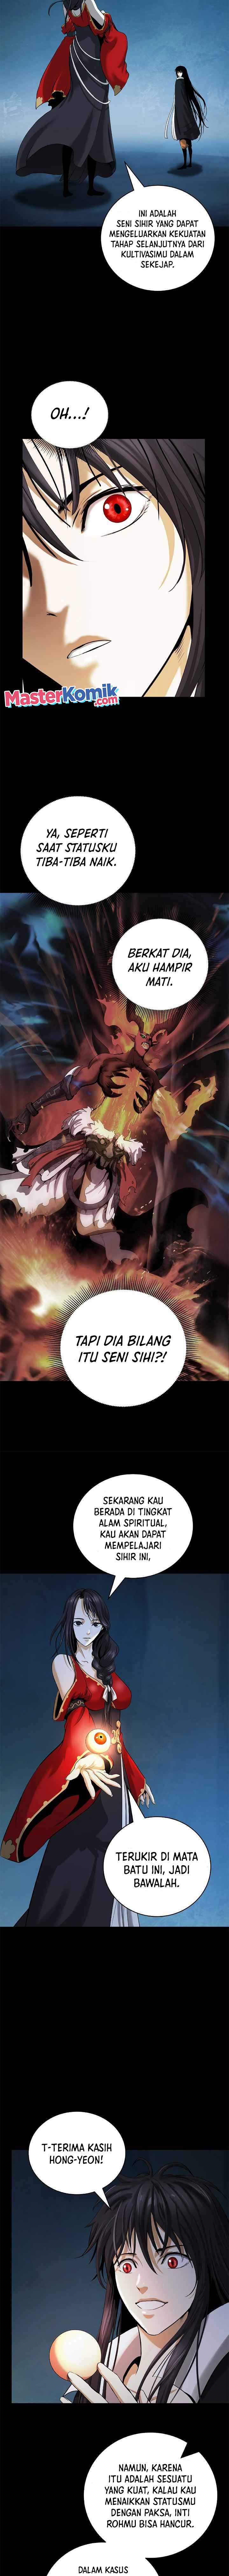 Cystic Story Chapter 81